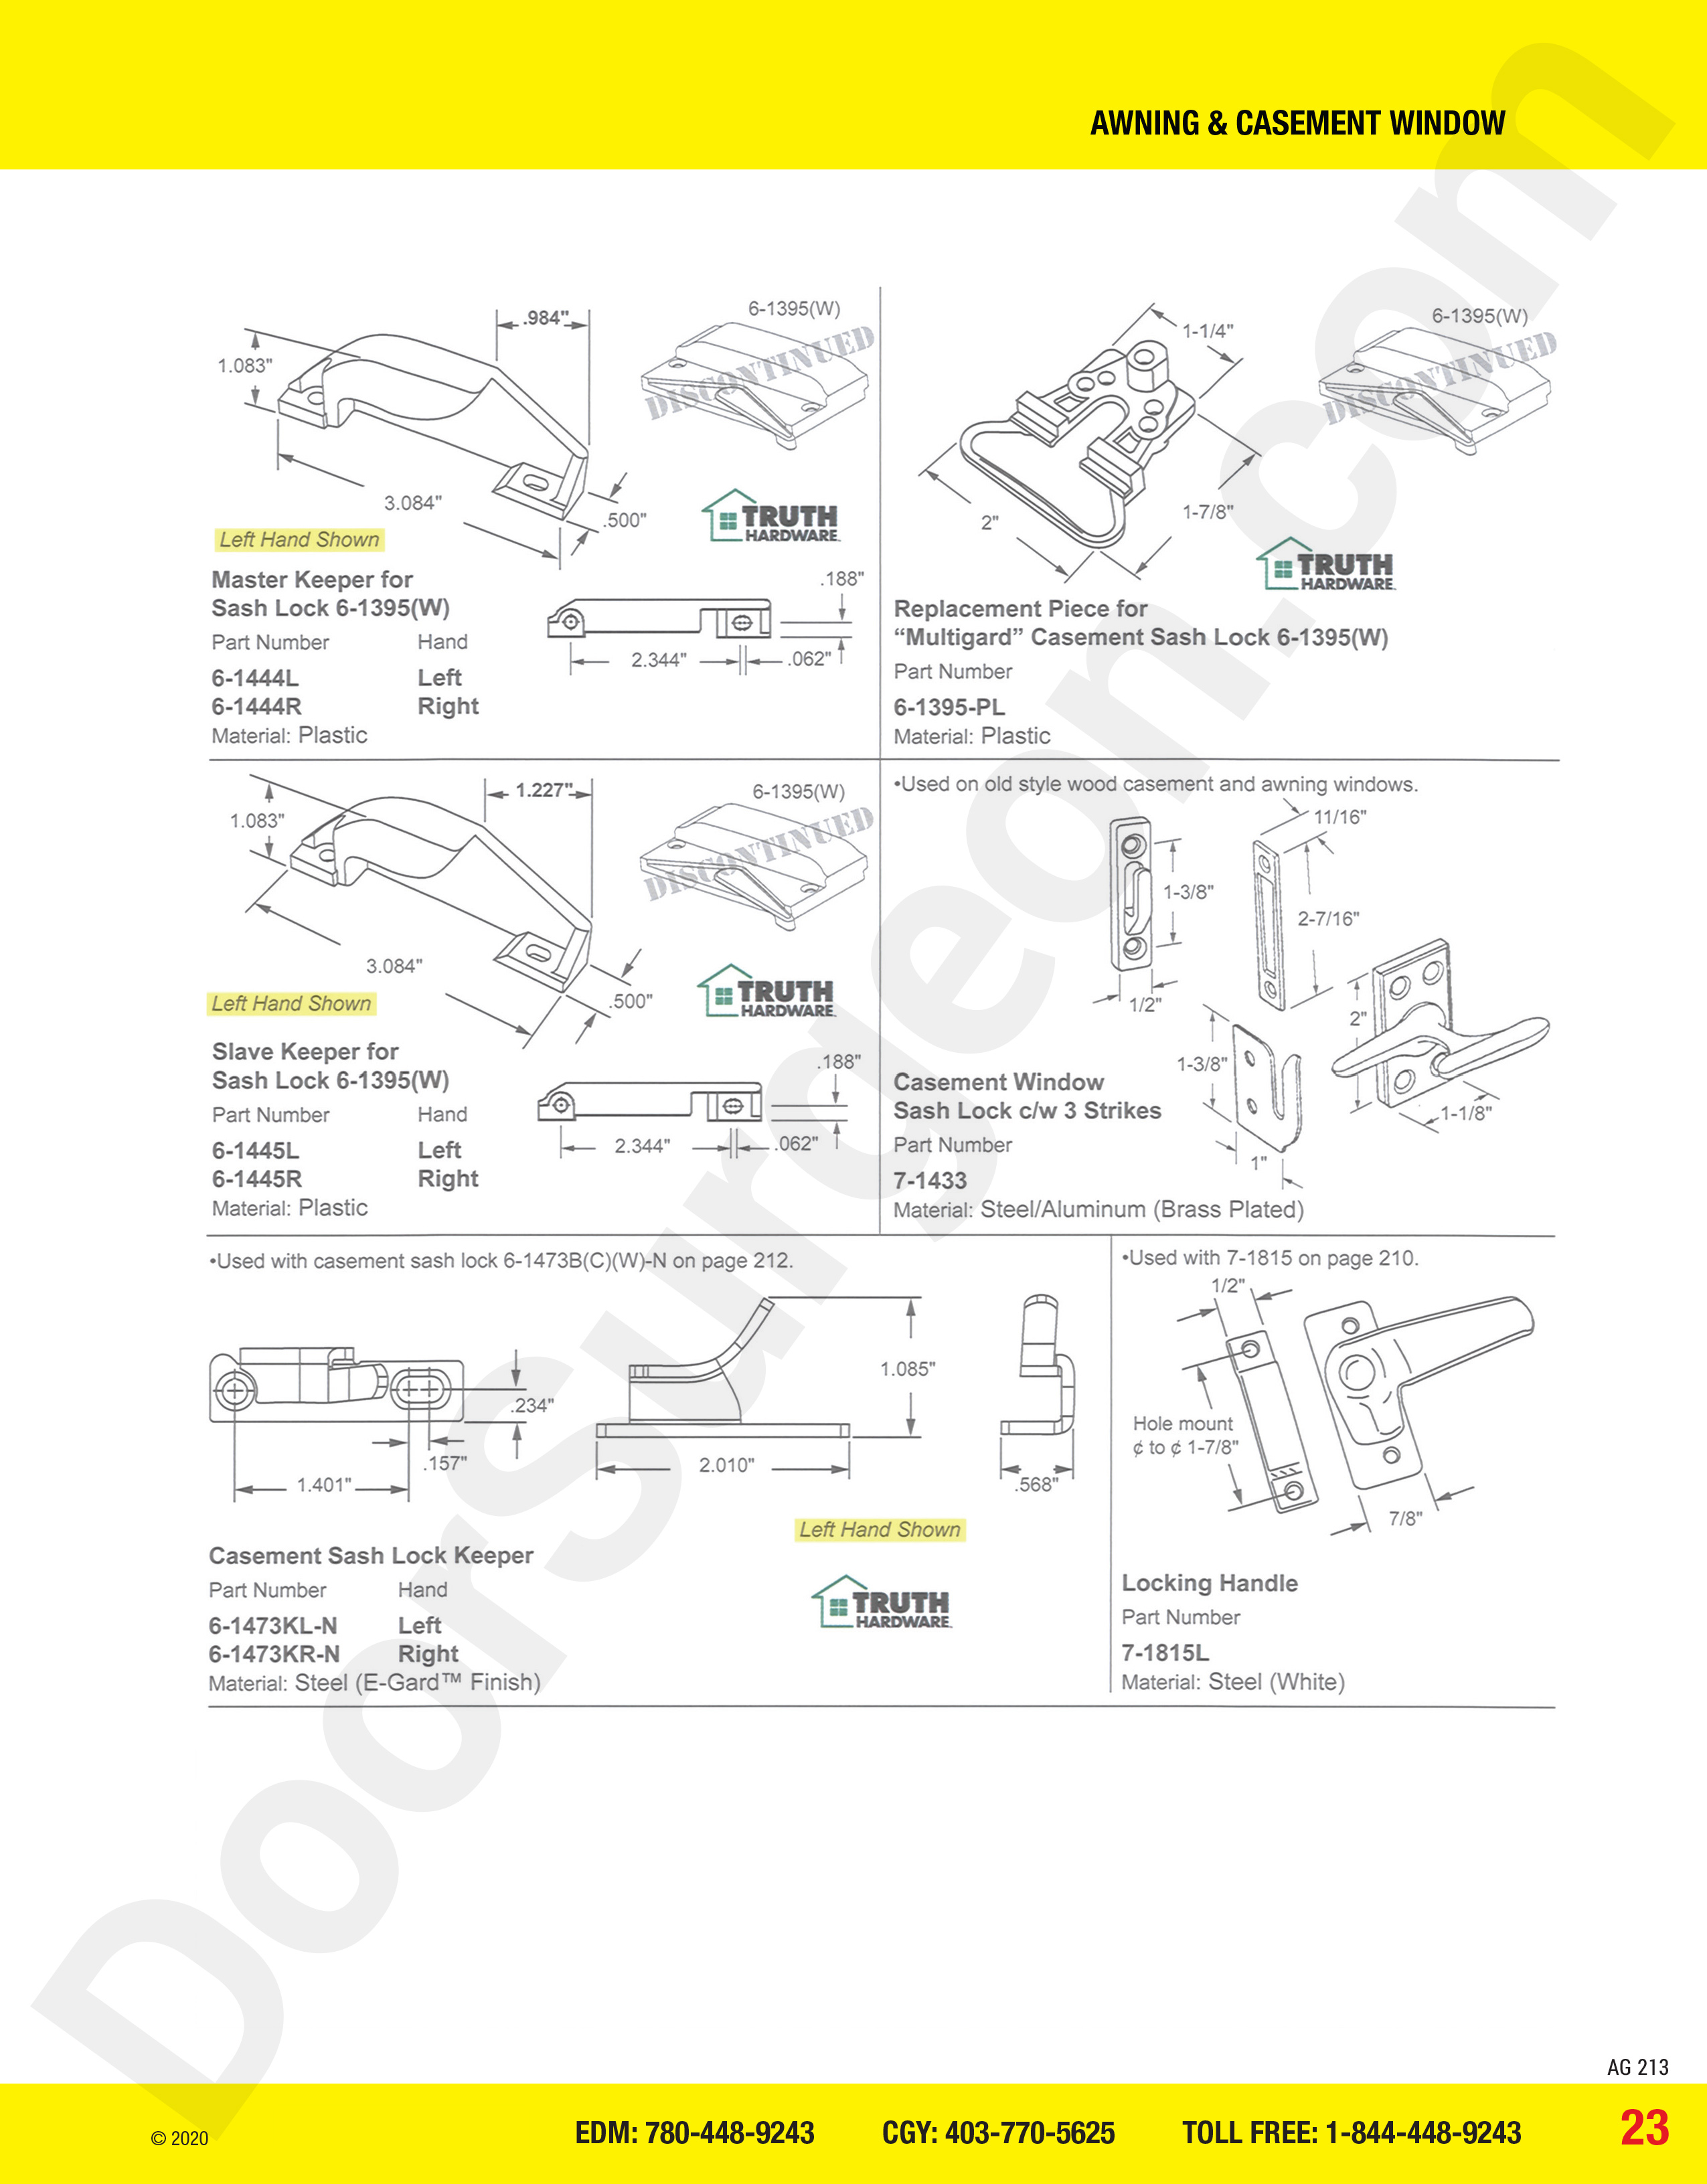 awning and casement window parts for sash locks